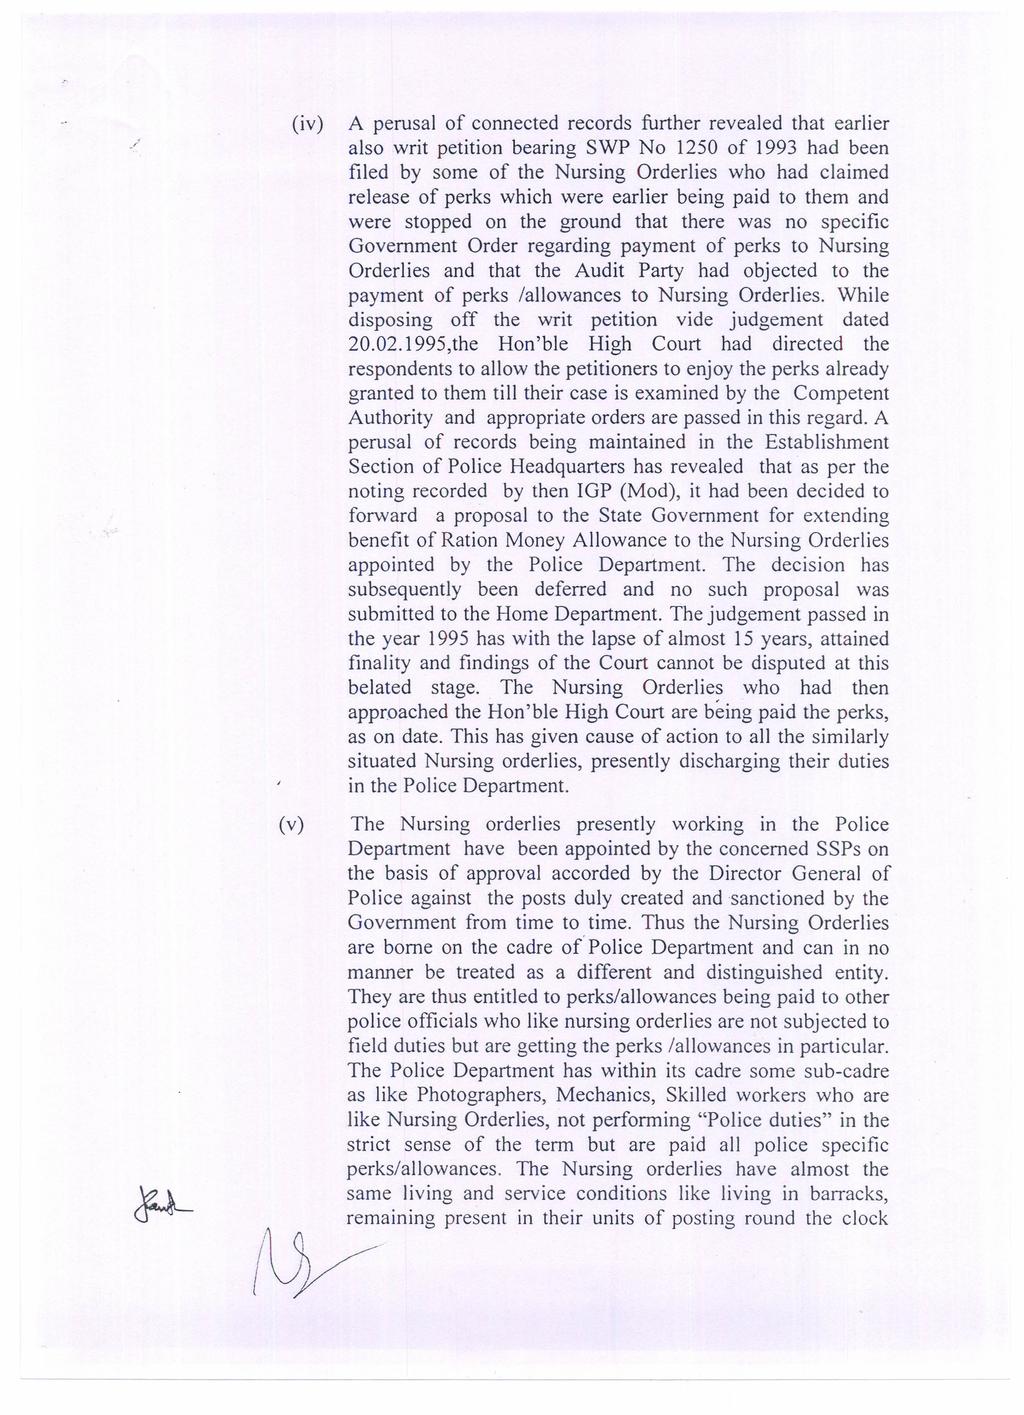 (iv) A perusal of connected records further revealed that earlier also writ petition bearing SWP No 1250 of 1993 had been filed by some of the Nursing Orderlies who had claimed release of perks which